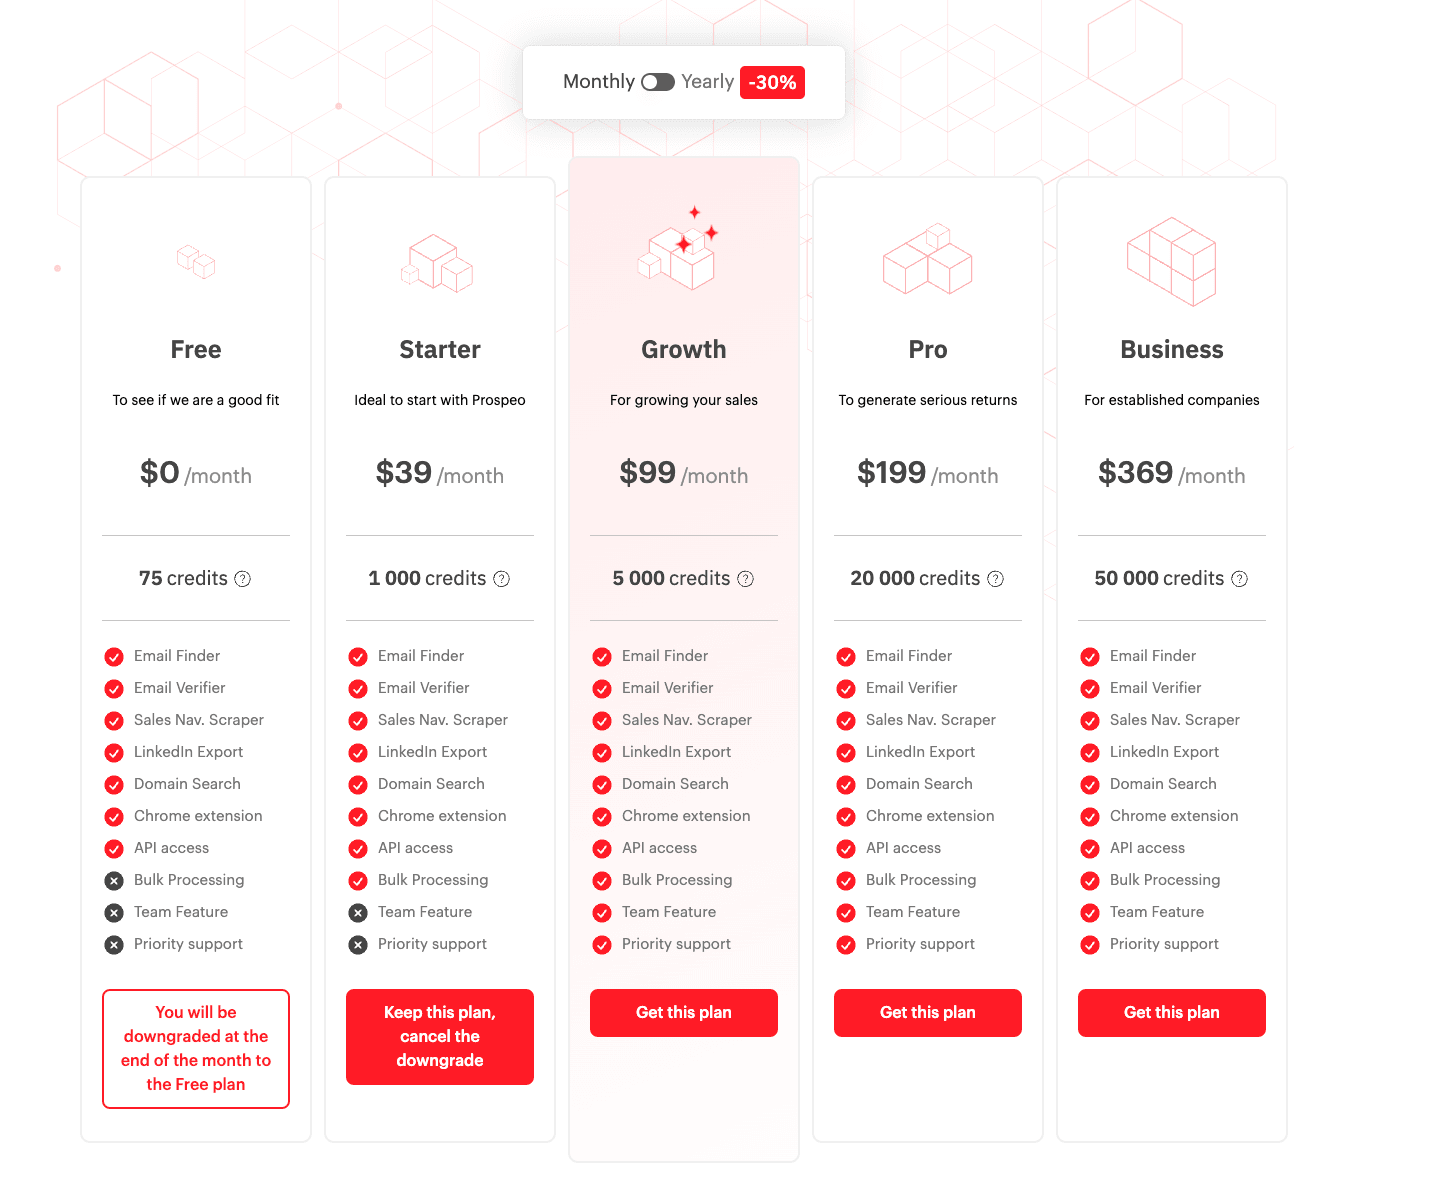 prospeo pricing page - image27.png